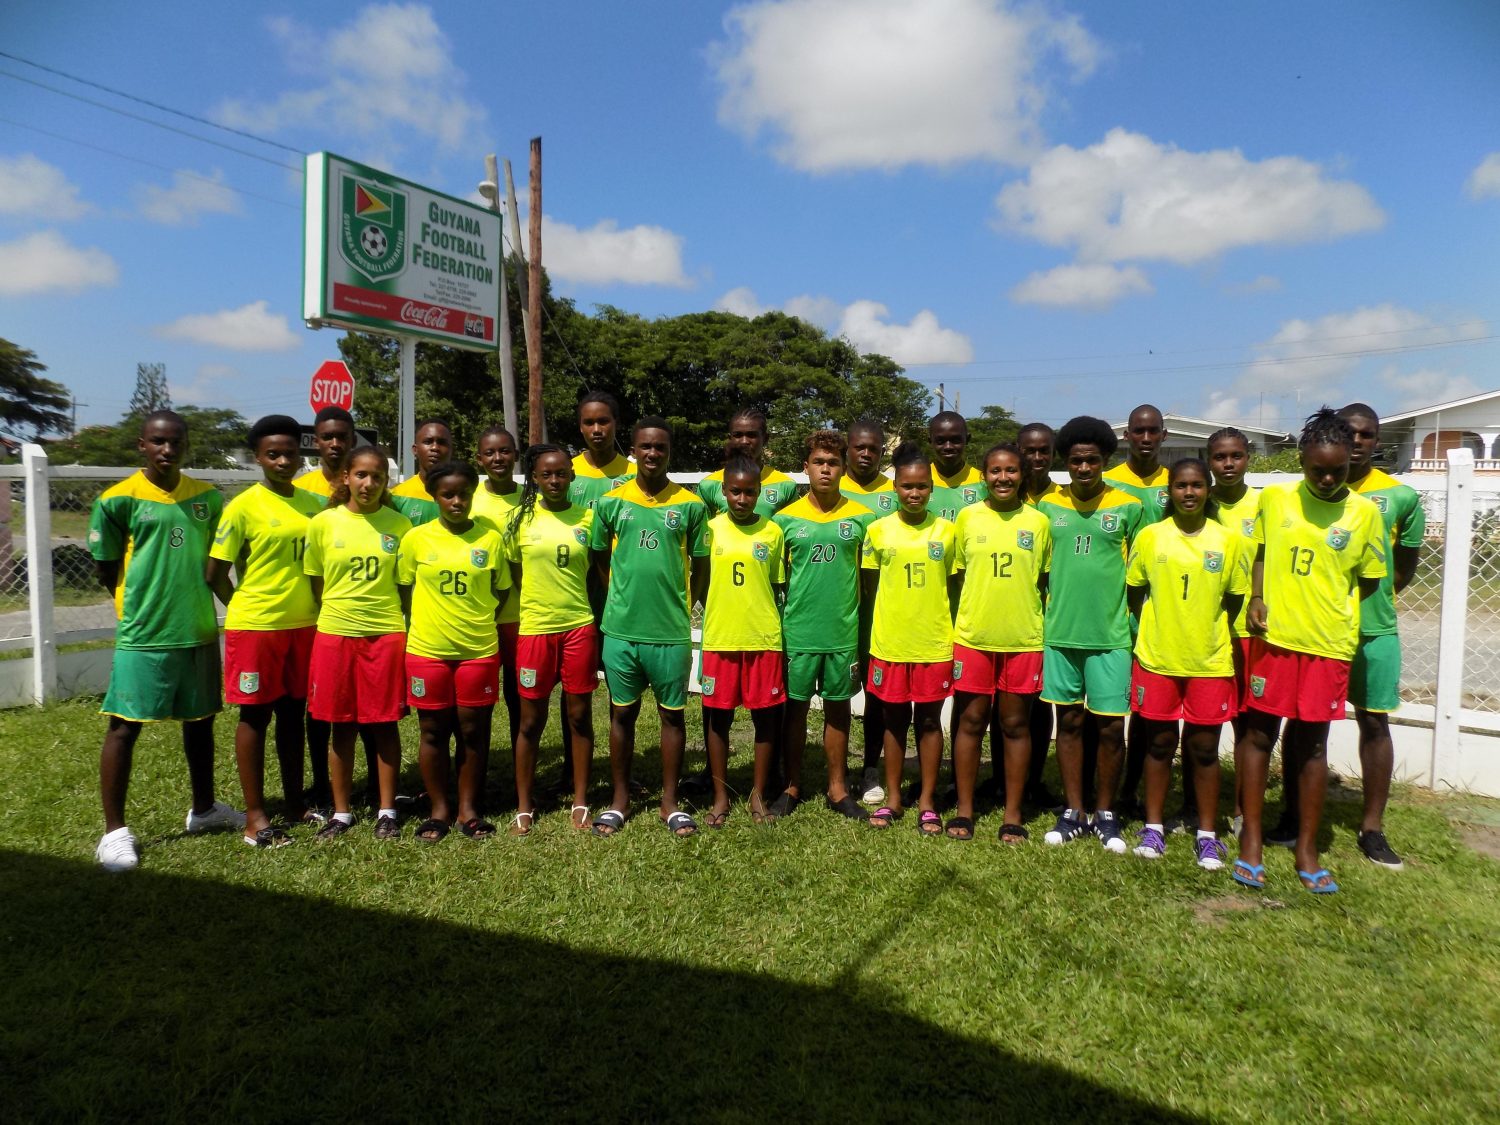 Members of the Guyana Boys and Girls Football teams which will compete at the Inter-Guiana Games Goodwill Series in Suriname